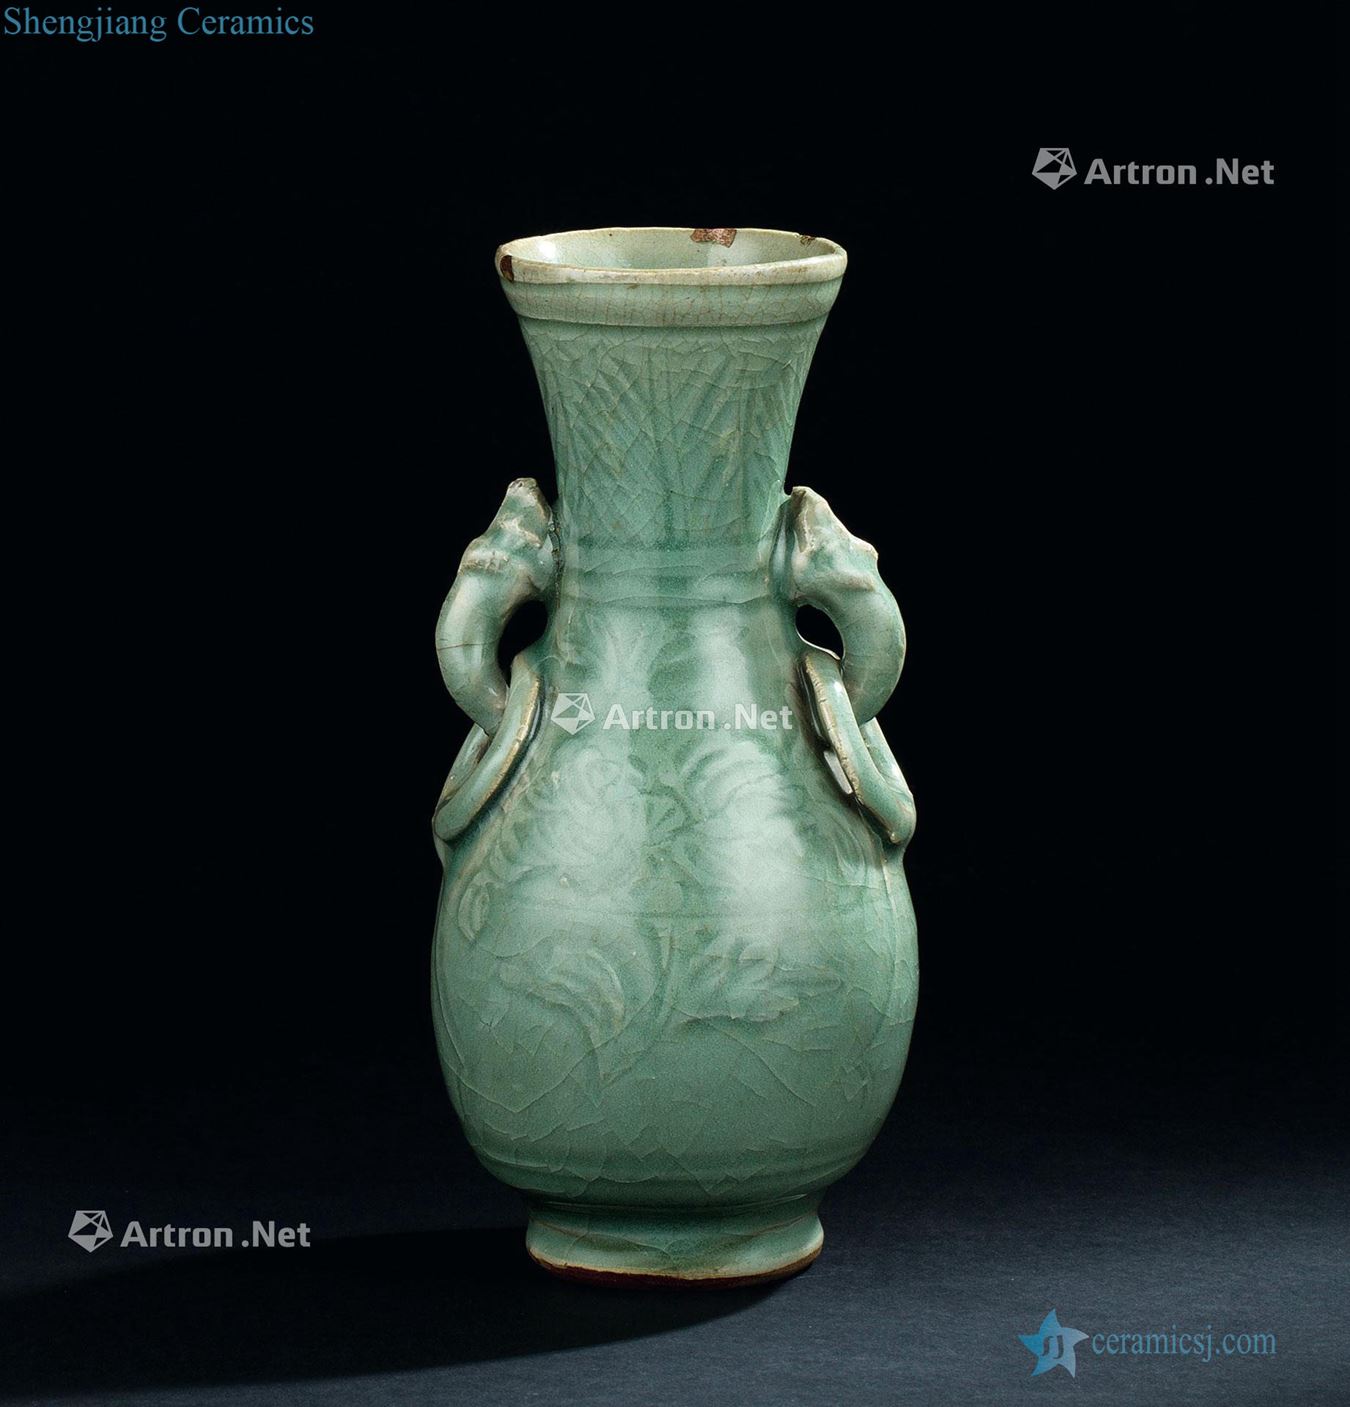 The yuan dynasty (1279-1368), longquan celadon flower vase with a double door knocker